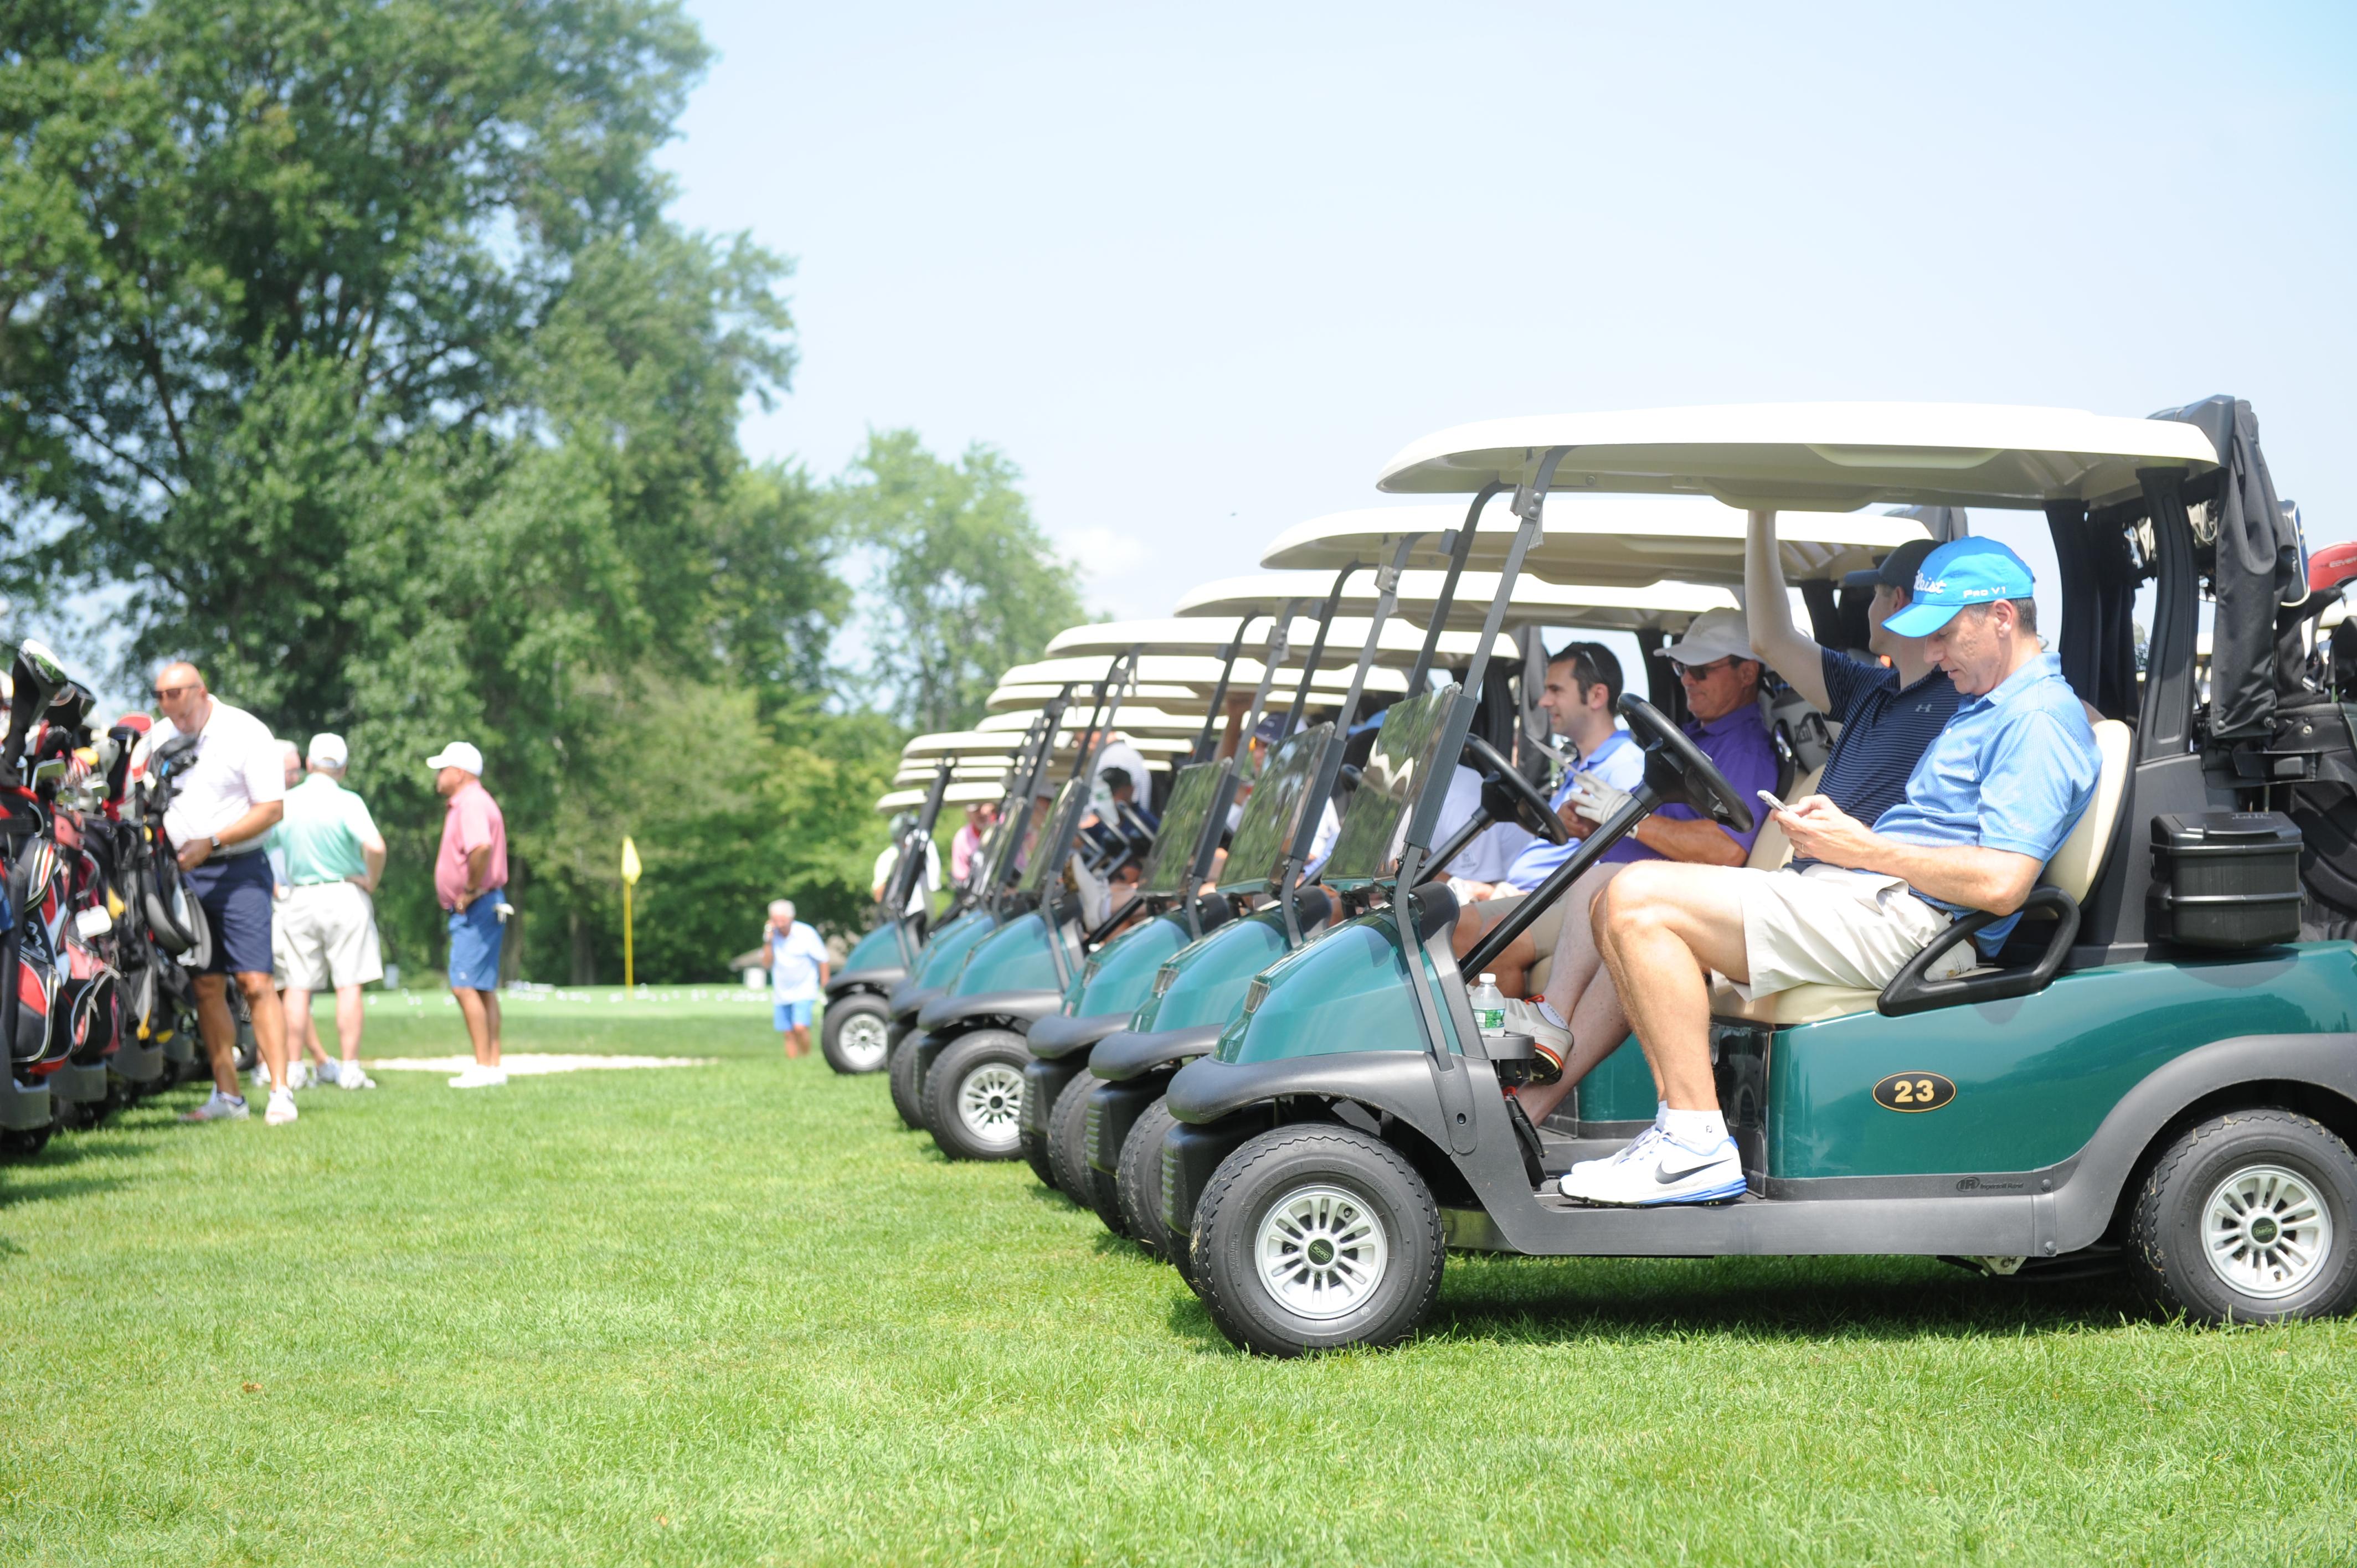 The Connecticut Golf Classic